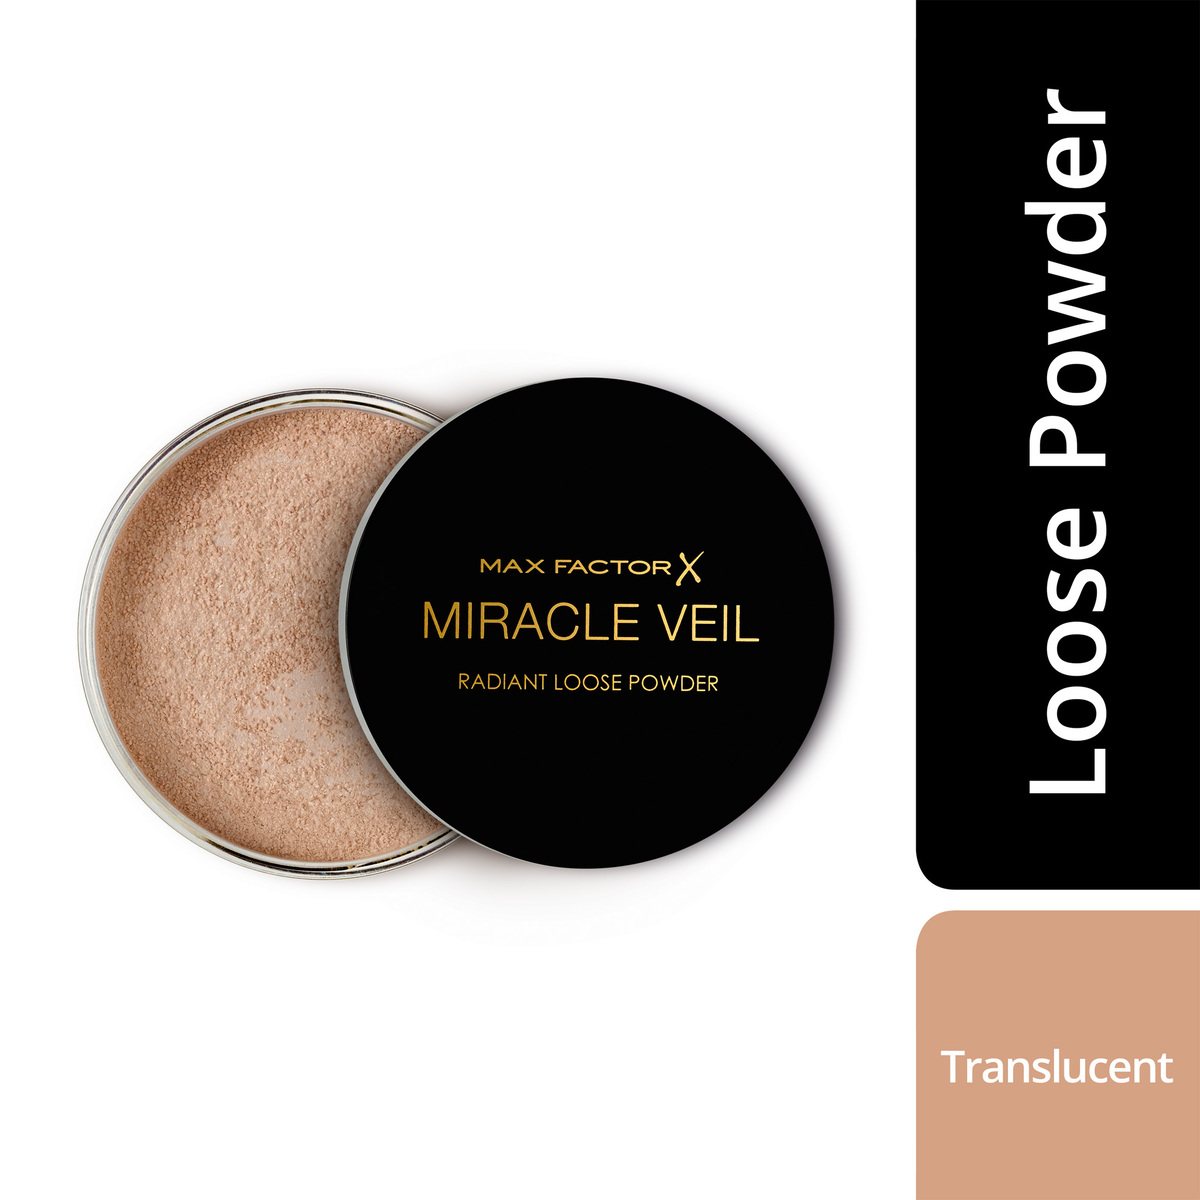 Max Factor Miracle Viel Radiant Loose Powder Translucent 4 g